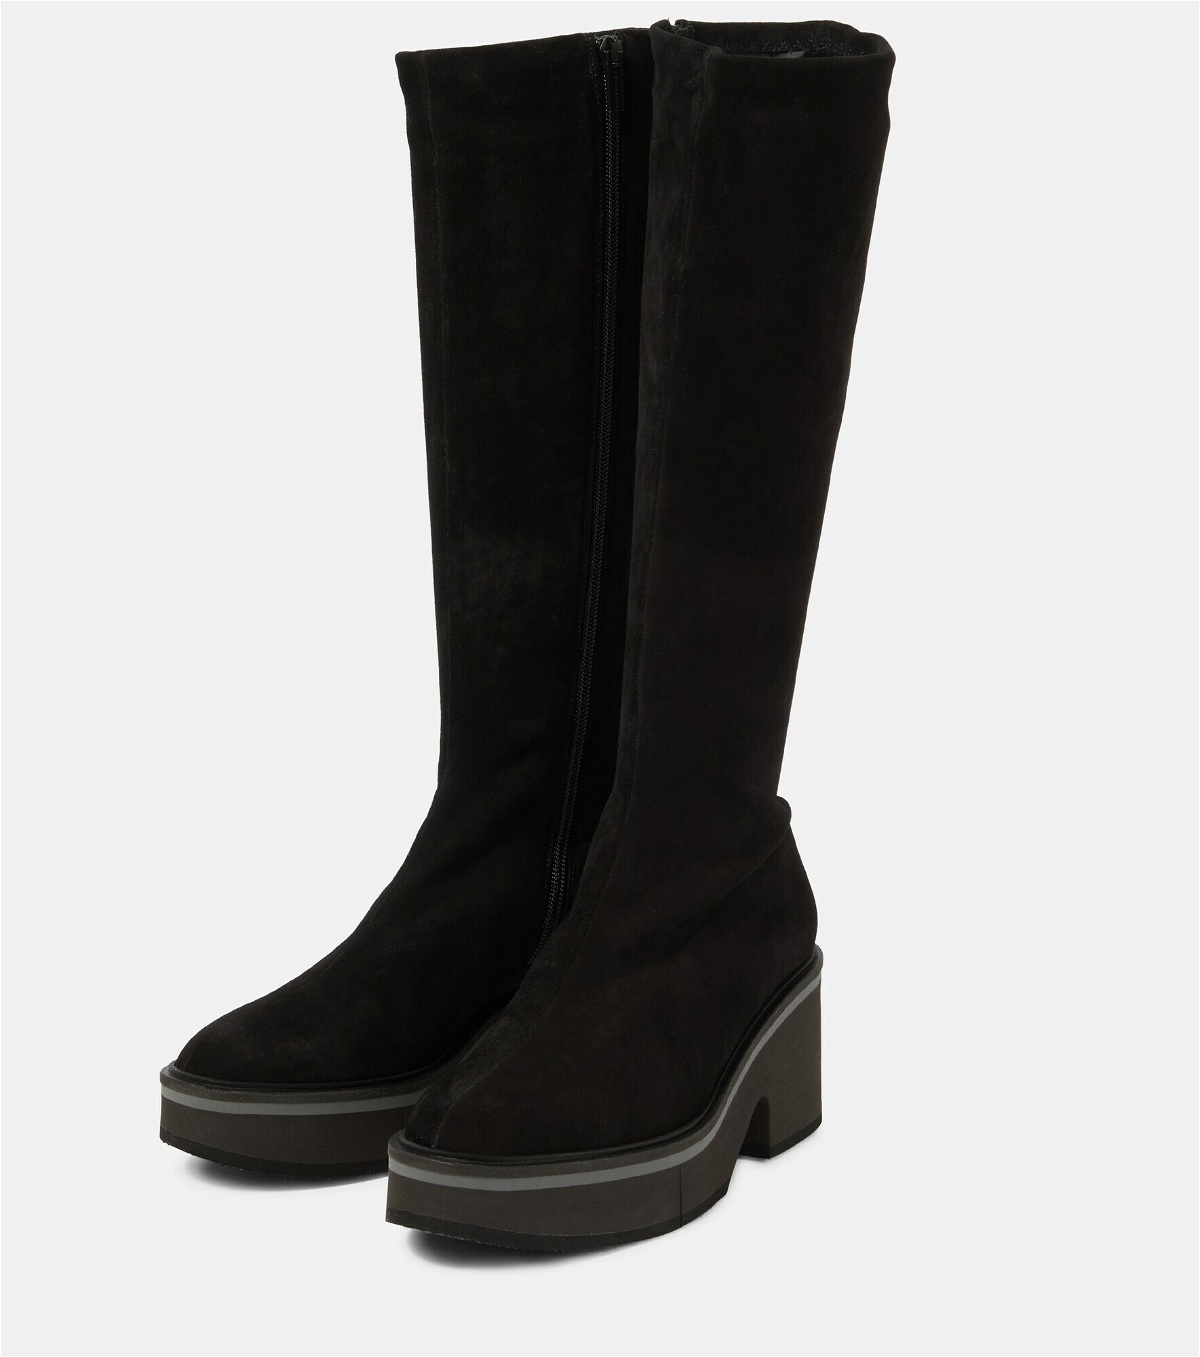 Clergerie - Anki suede knee-high boots Clergerie